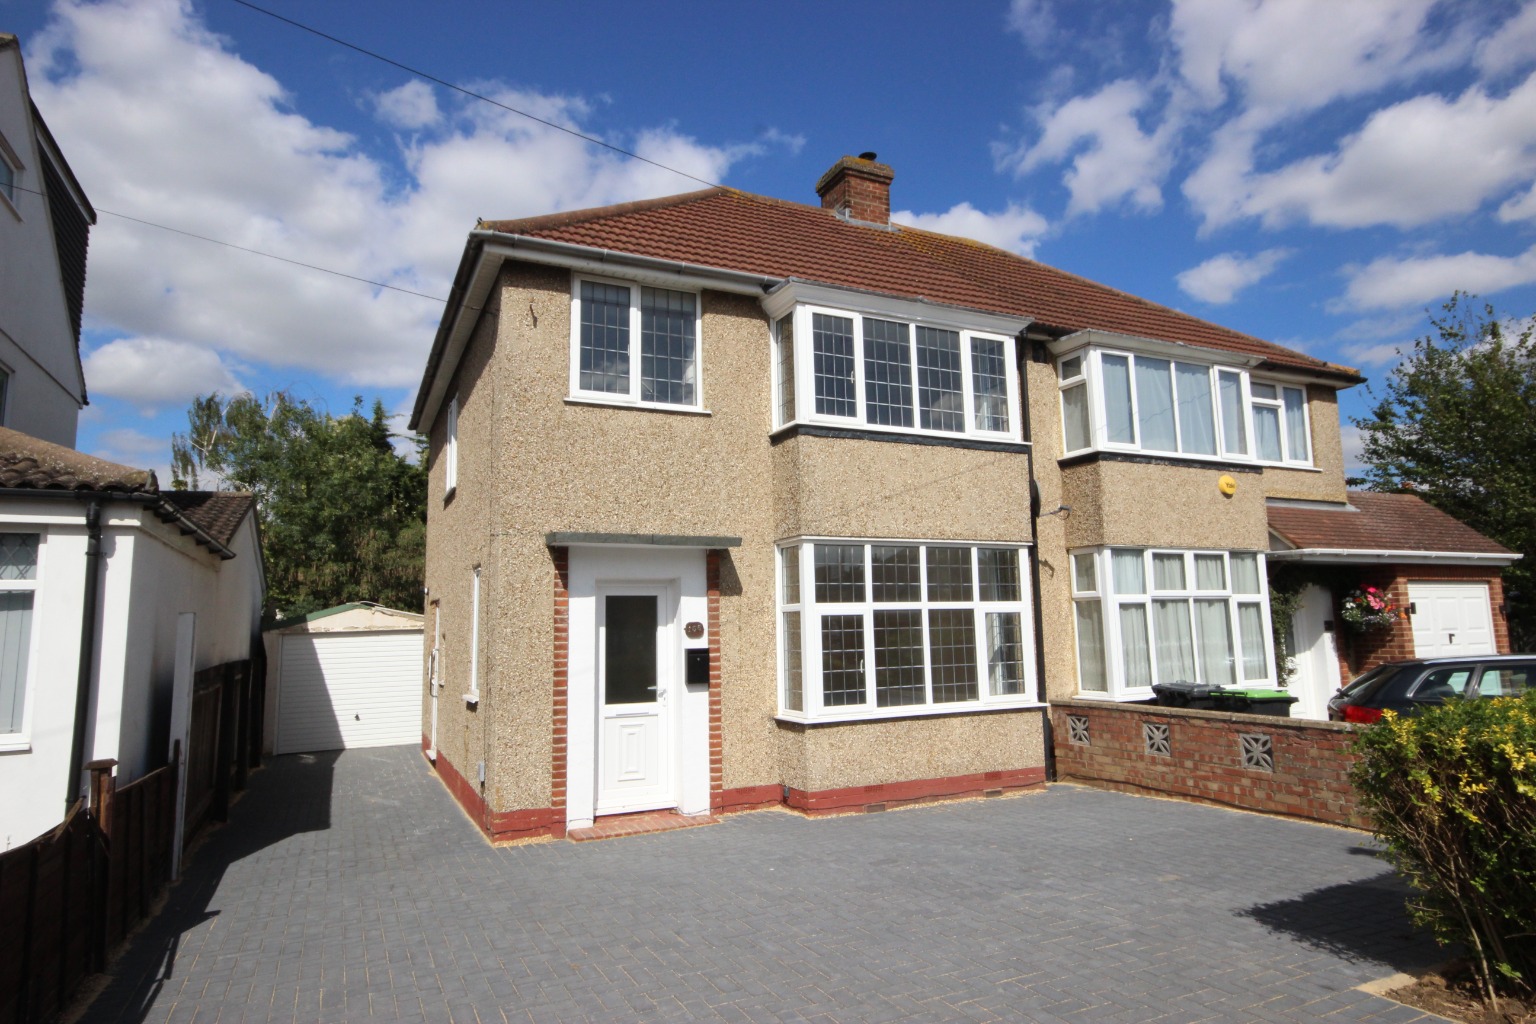 3 bed semi-detached house to rent in Wendover Drive, Bedford - Property Image 1